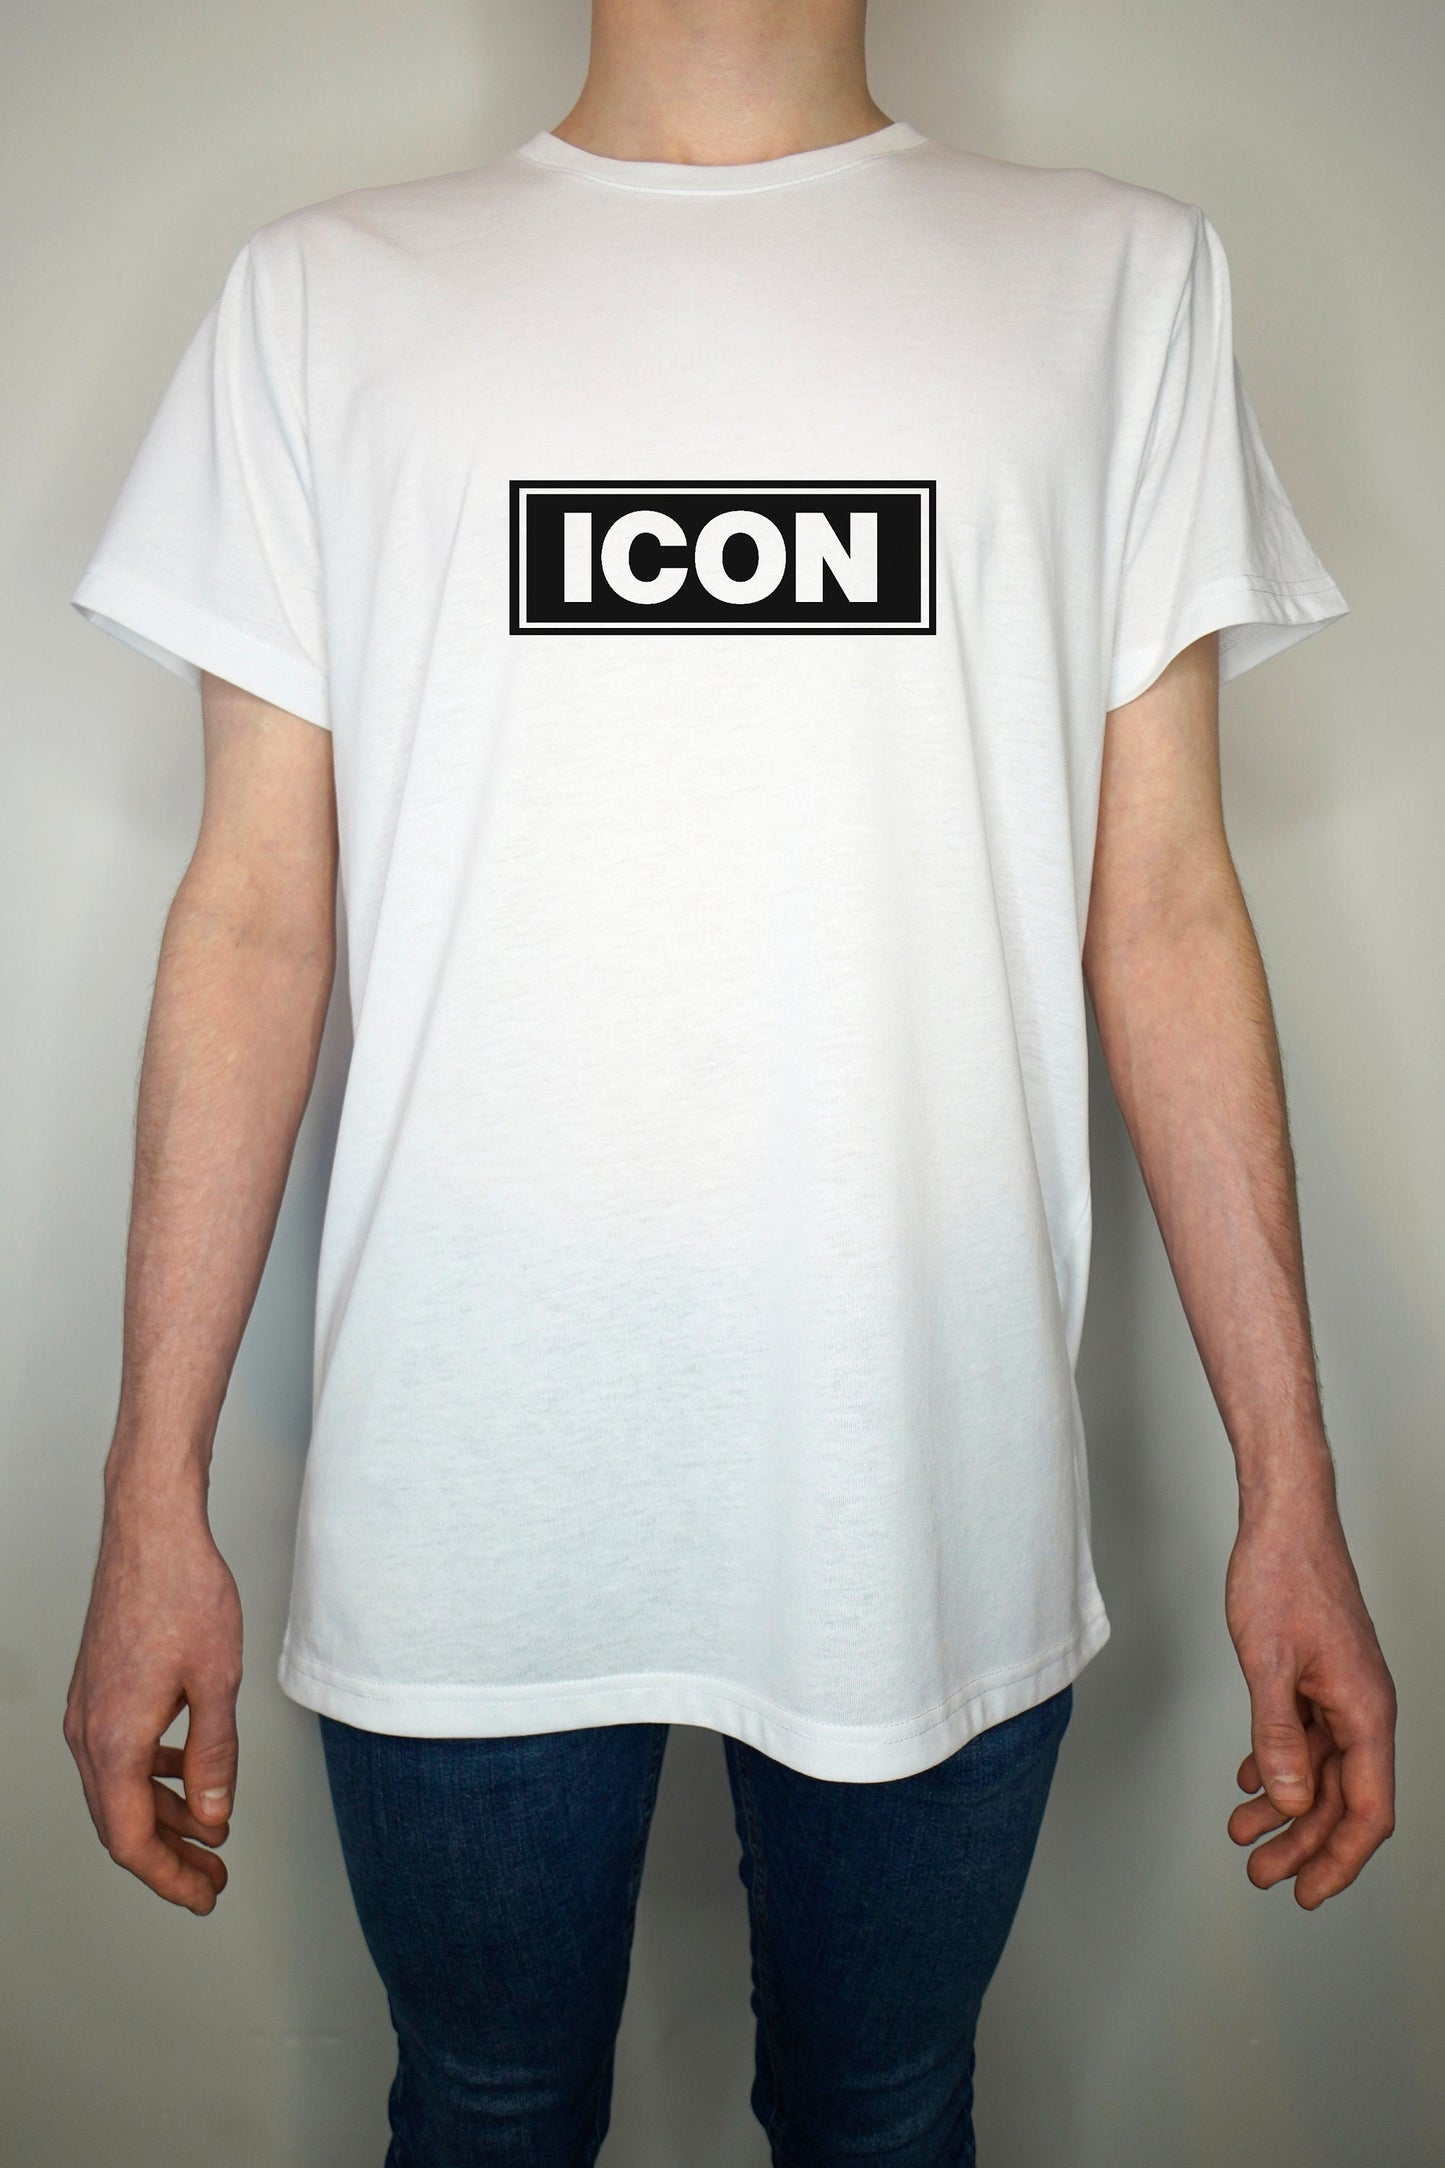 Icon T shirt - Bold simple design - Premium Quality Summer Light weight 65/35 Polyester Cotton